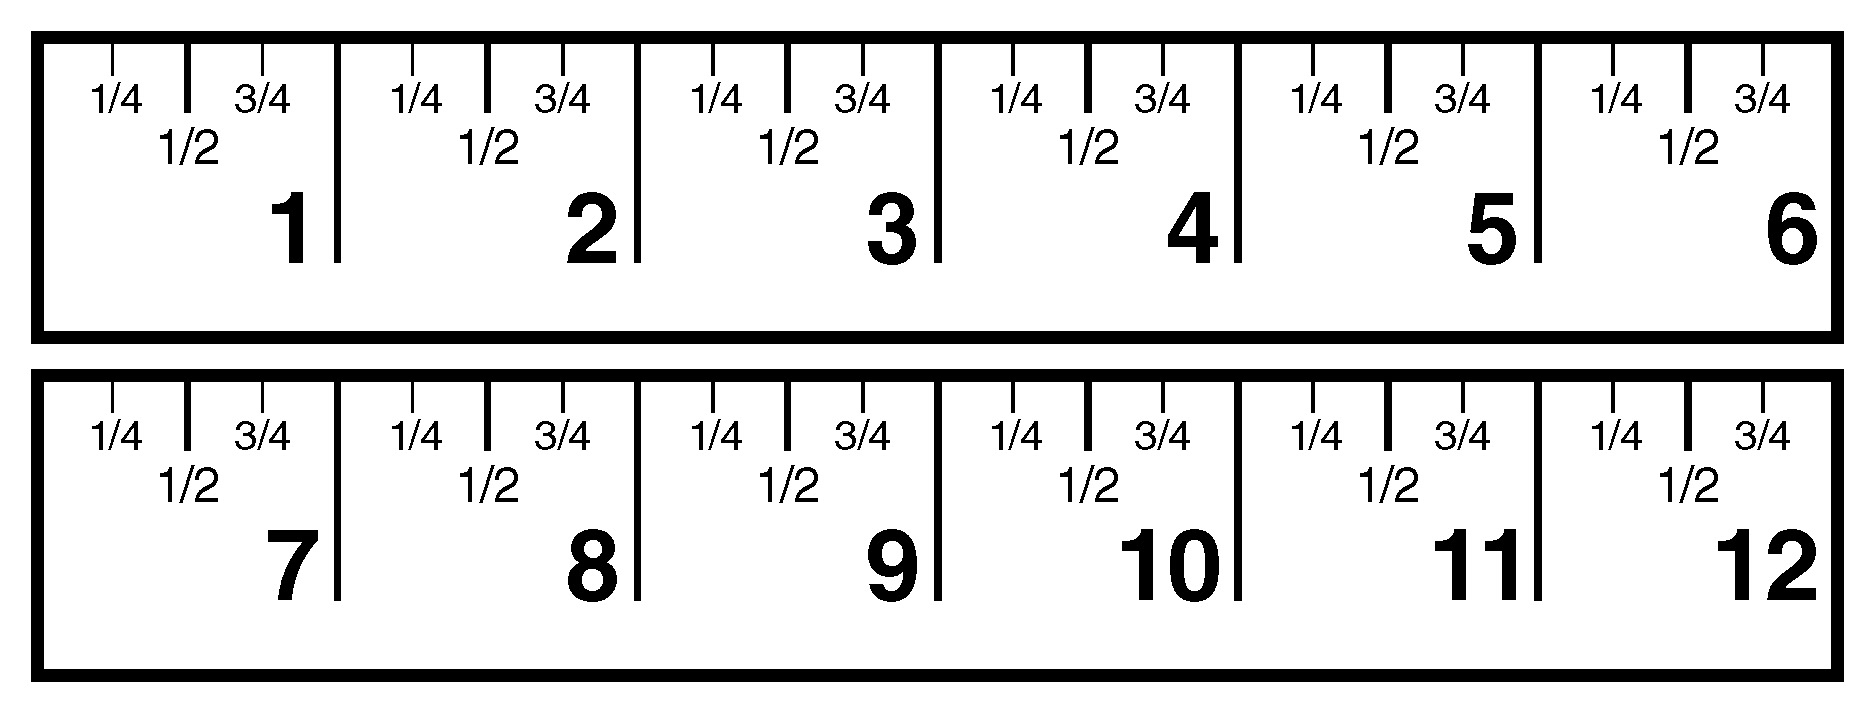 Printable Inch Ruler To The 1/4 In Printable Ruler Actual Size